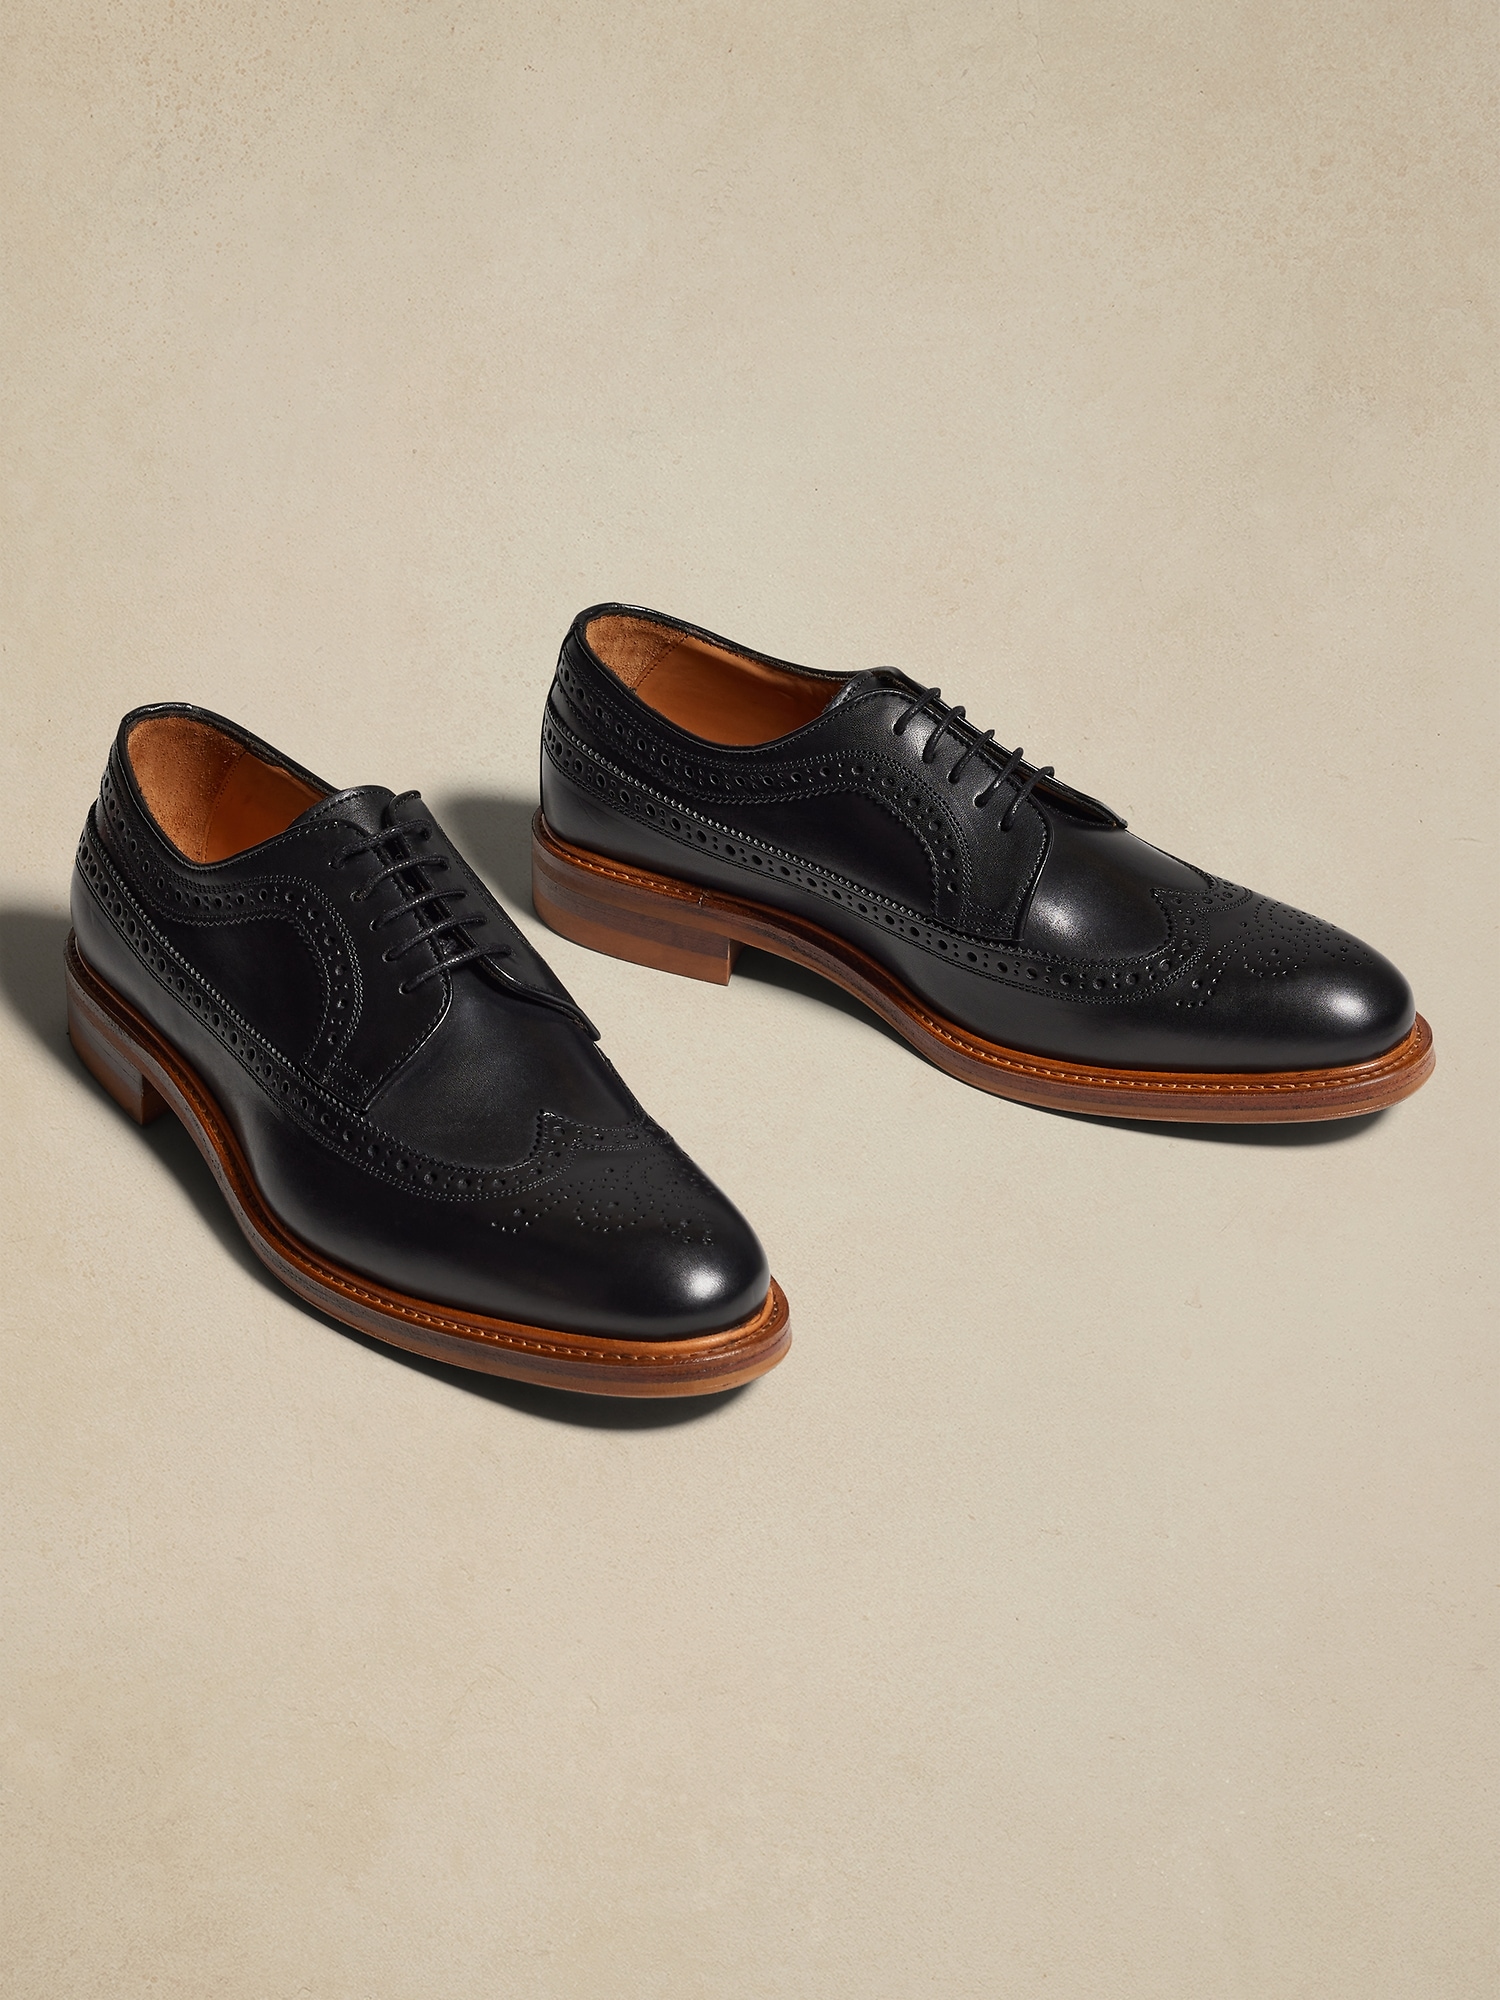 Another Kiltie | Brogue shoes women, Brogues, Leather brogues-calidas.vn